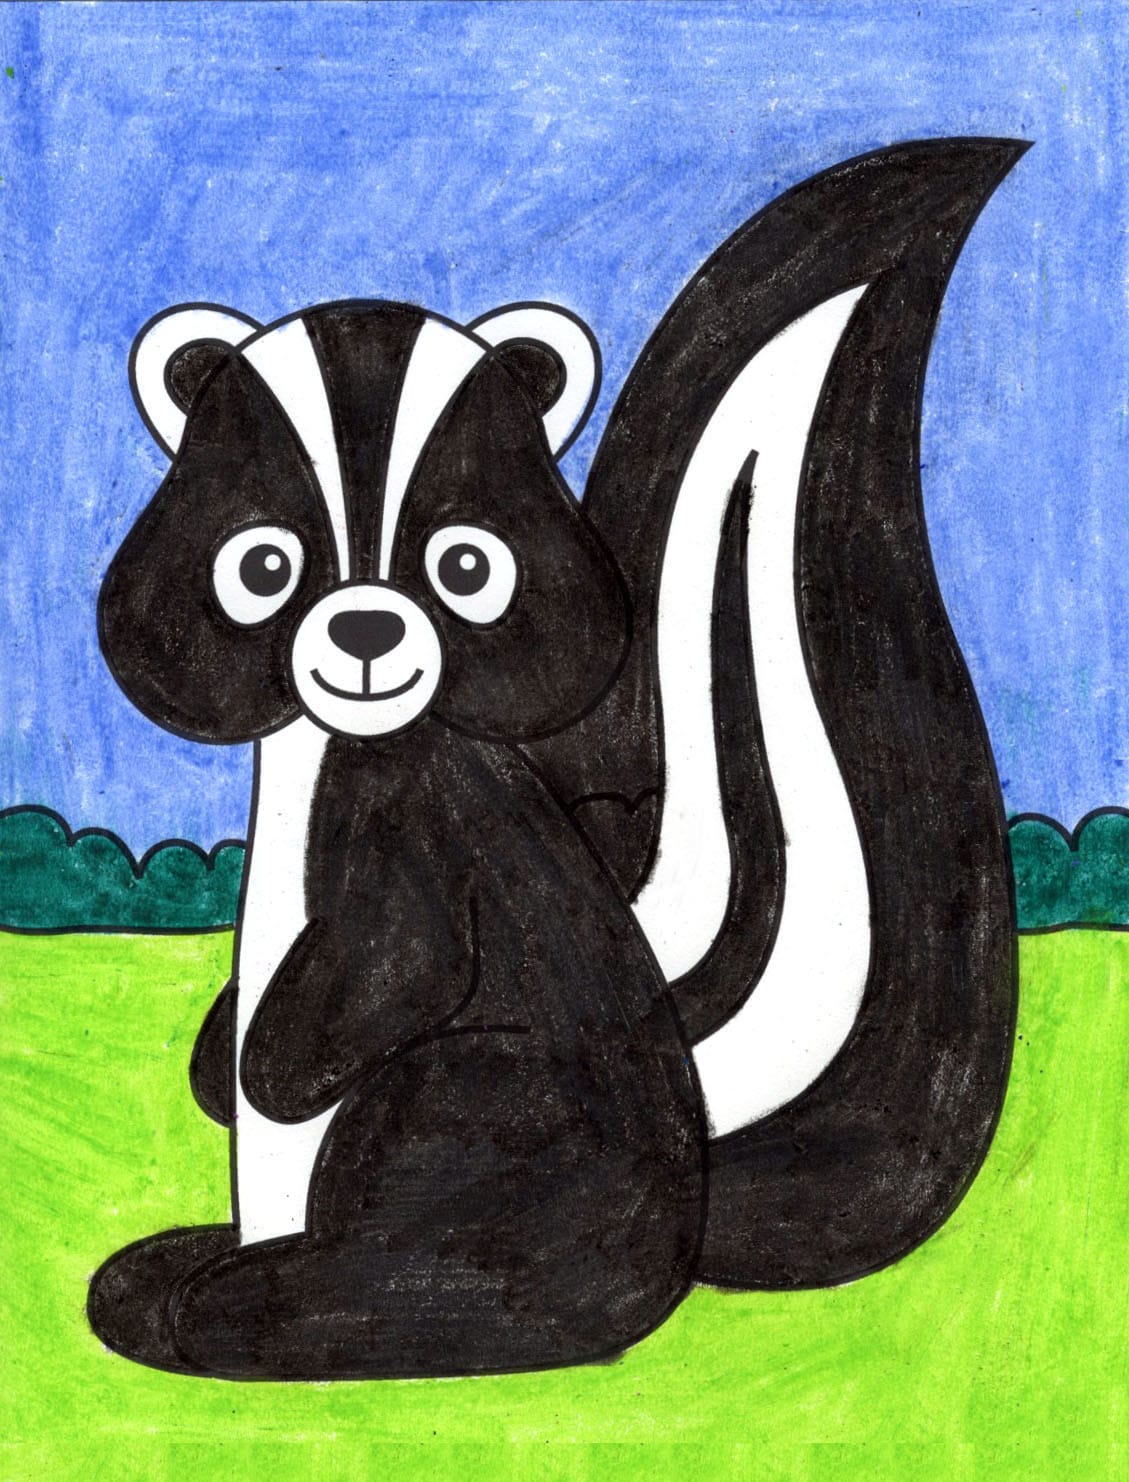 Easy How to Draw a Skunk Tutorial and Skunk Coloring Page